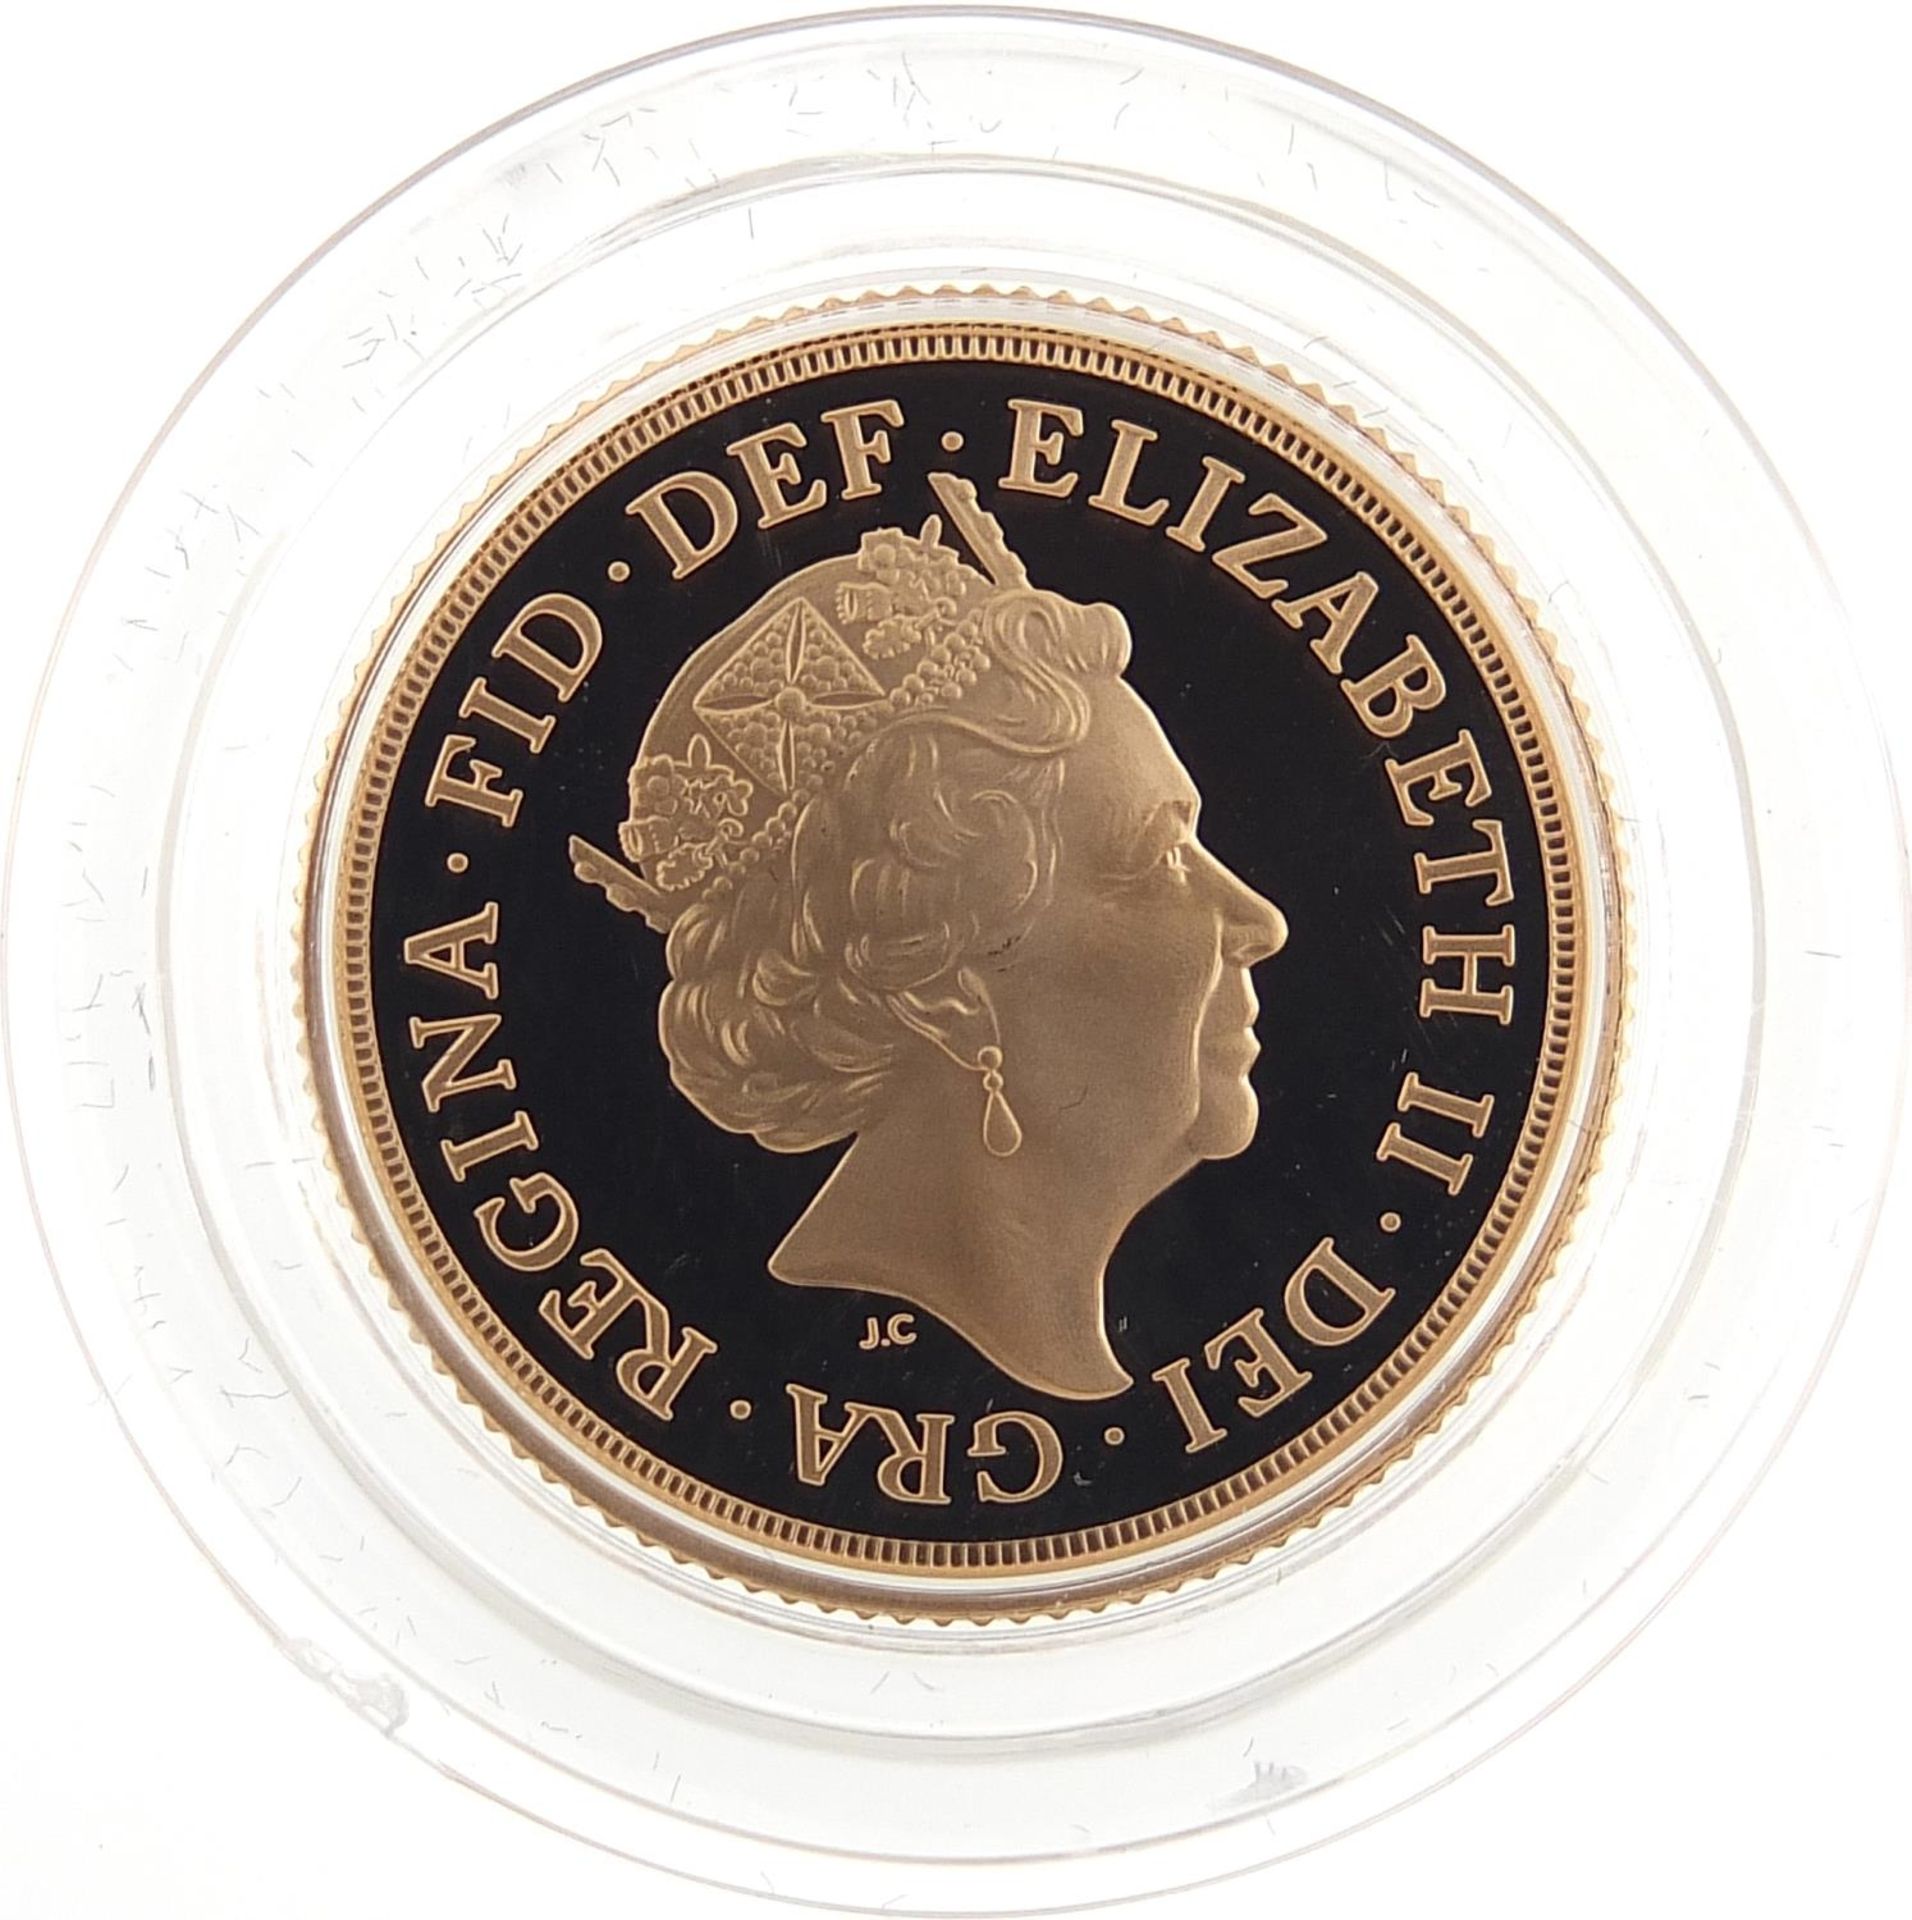 Elizabeth II 2019 gold proof sovereign with box and certificate, 7116/9500 - this lot is sold - Image 3 of 4